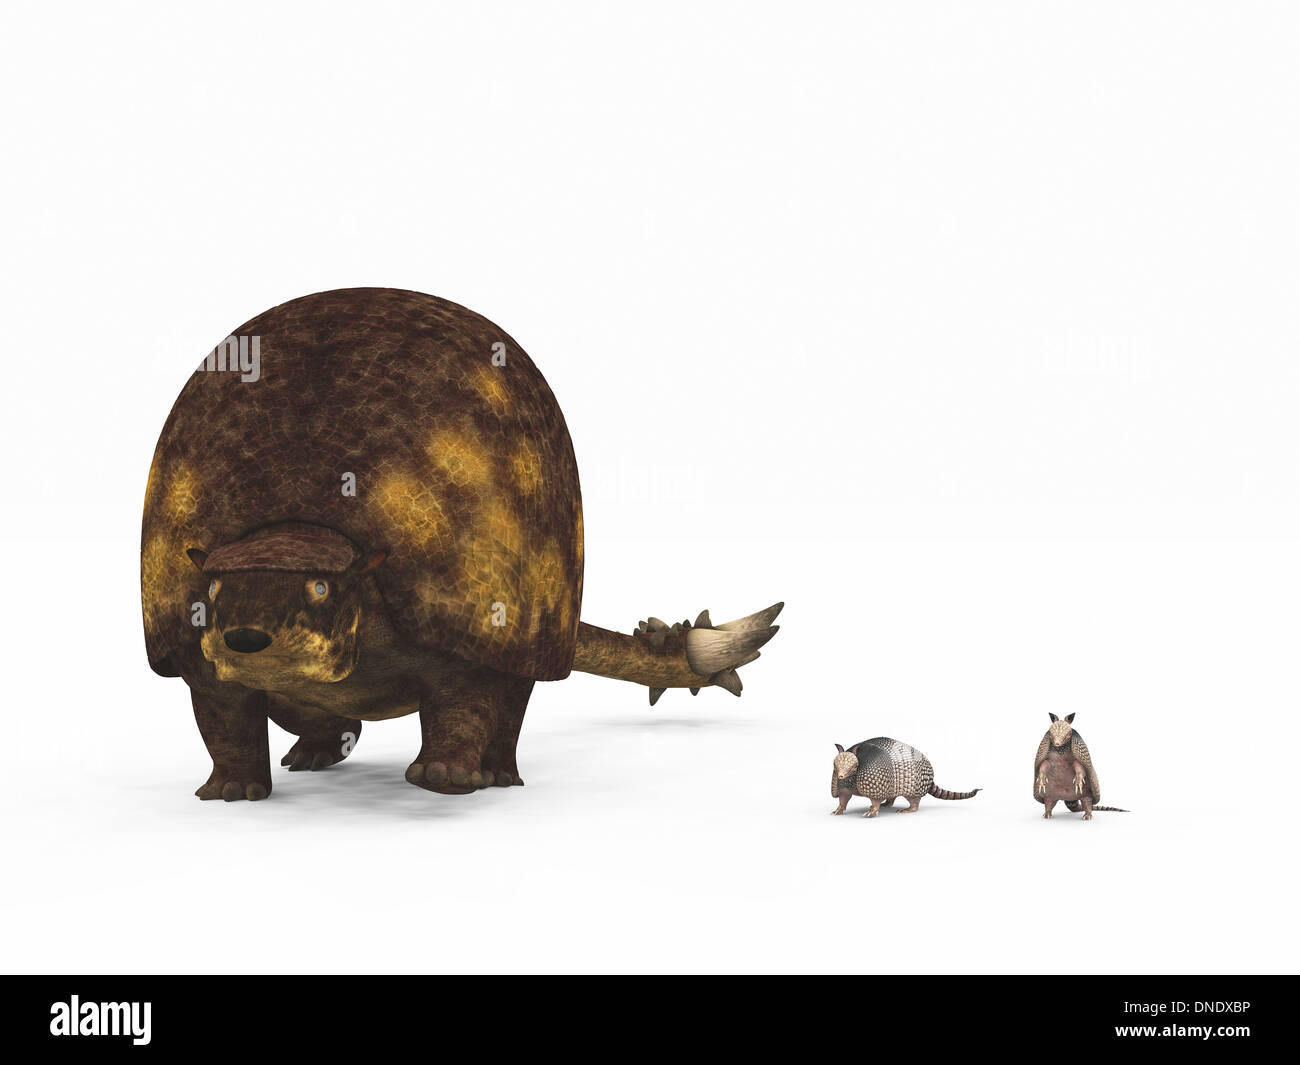 A Doedicurus glyptodont compared to modern armadillos. Stock Photo